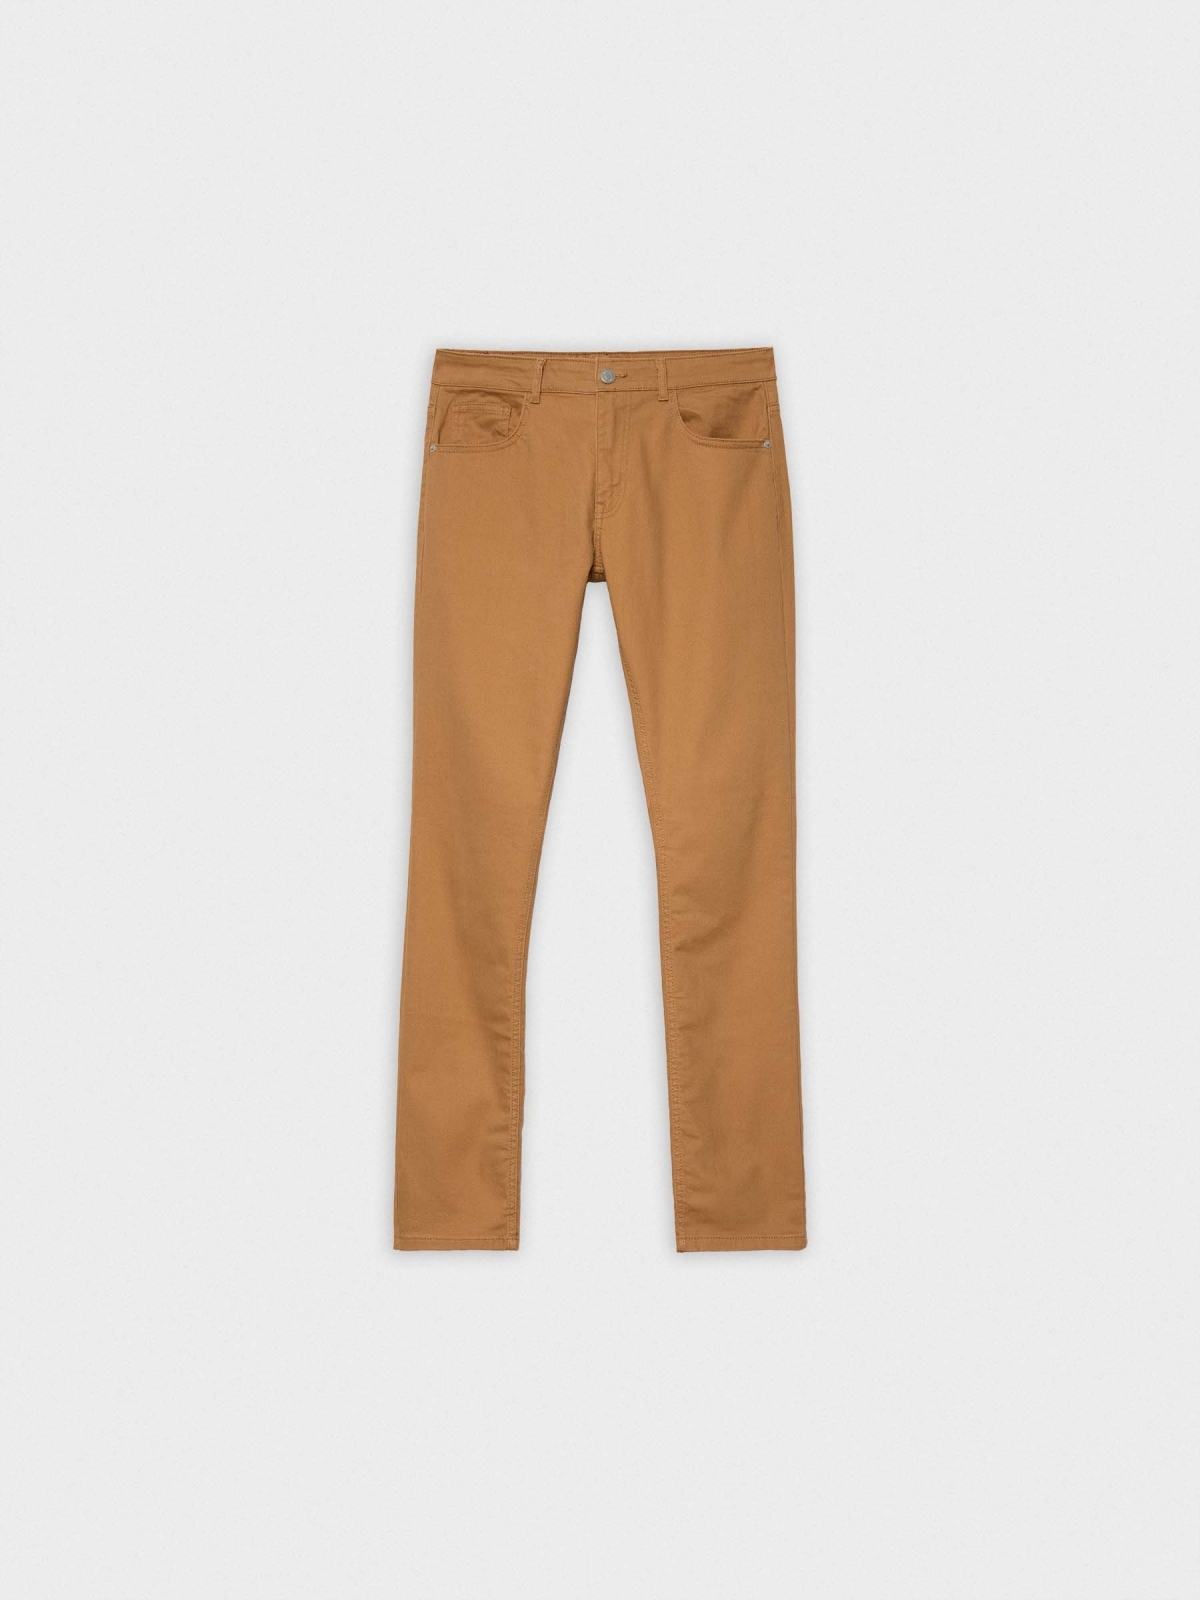  Basic colored jeans brown